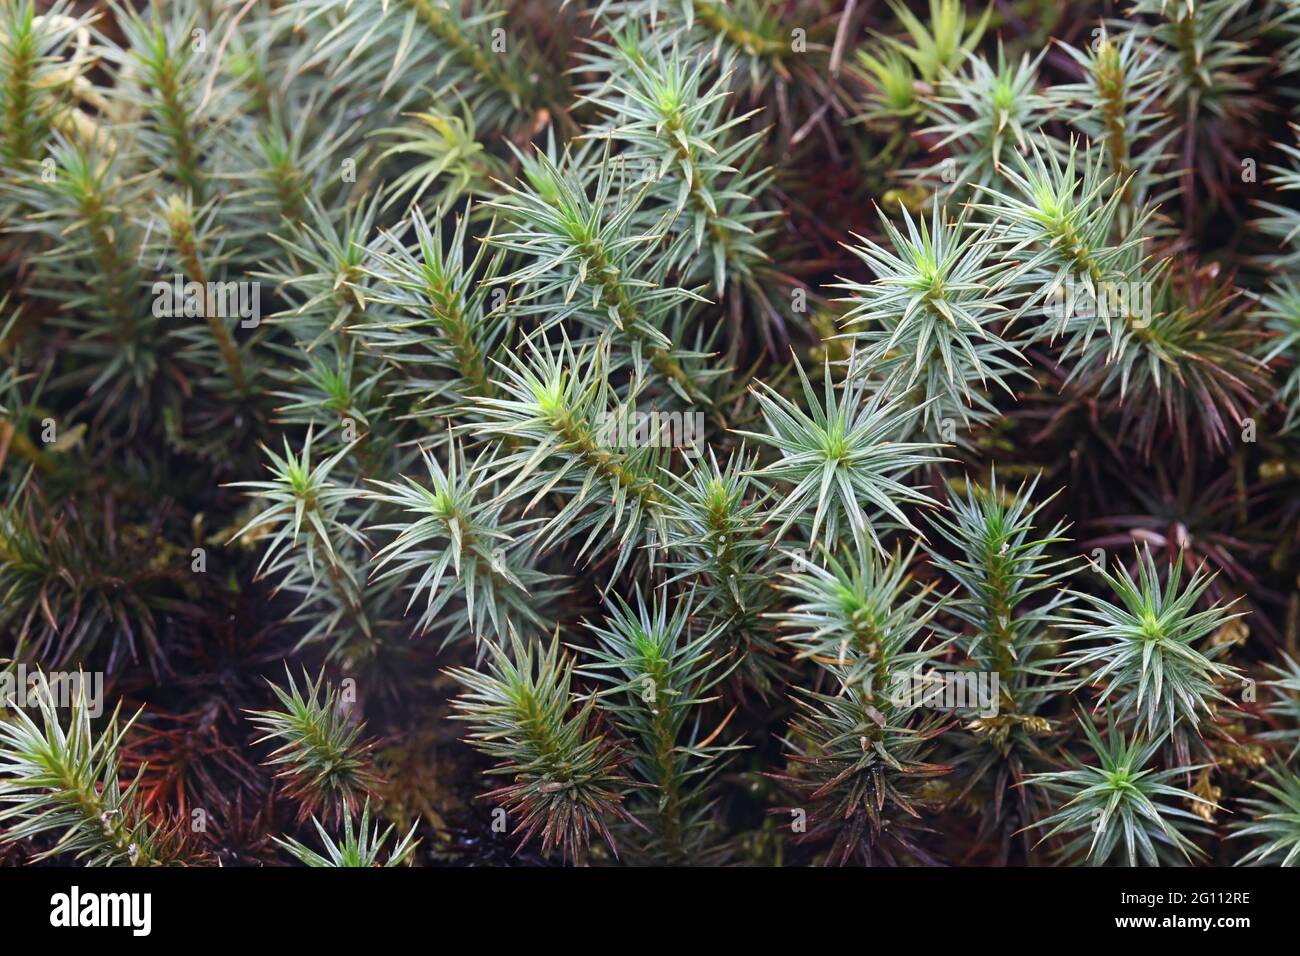 Polytrichum juniperinum, commonly known as juniper haircap or juniper polytrichum moss, an evergreen and perennial species of moss from Finland Stock Photo